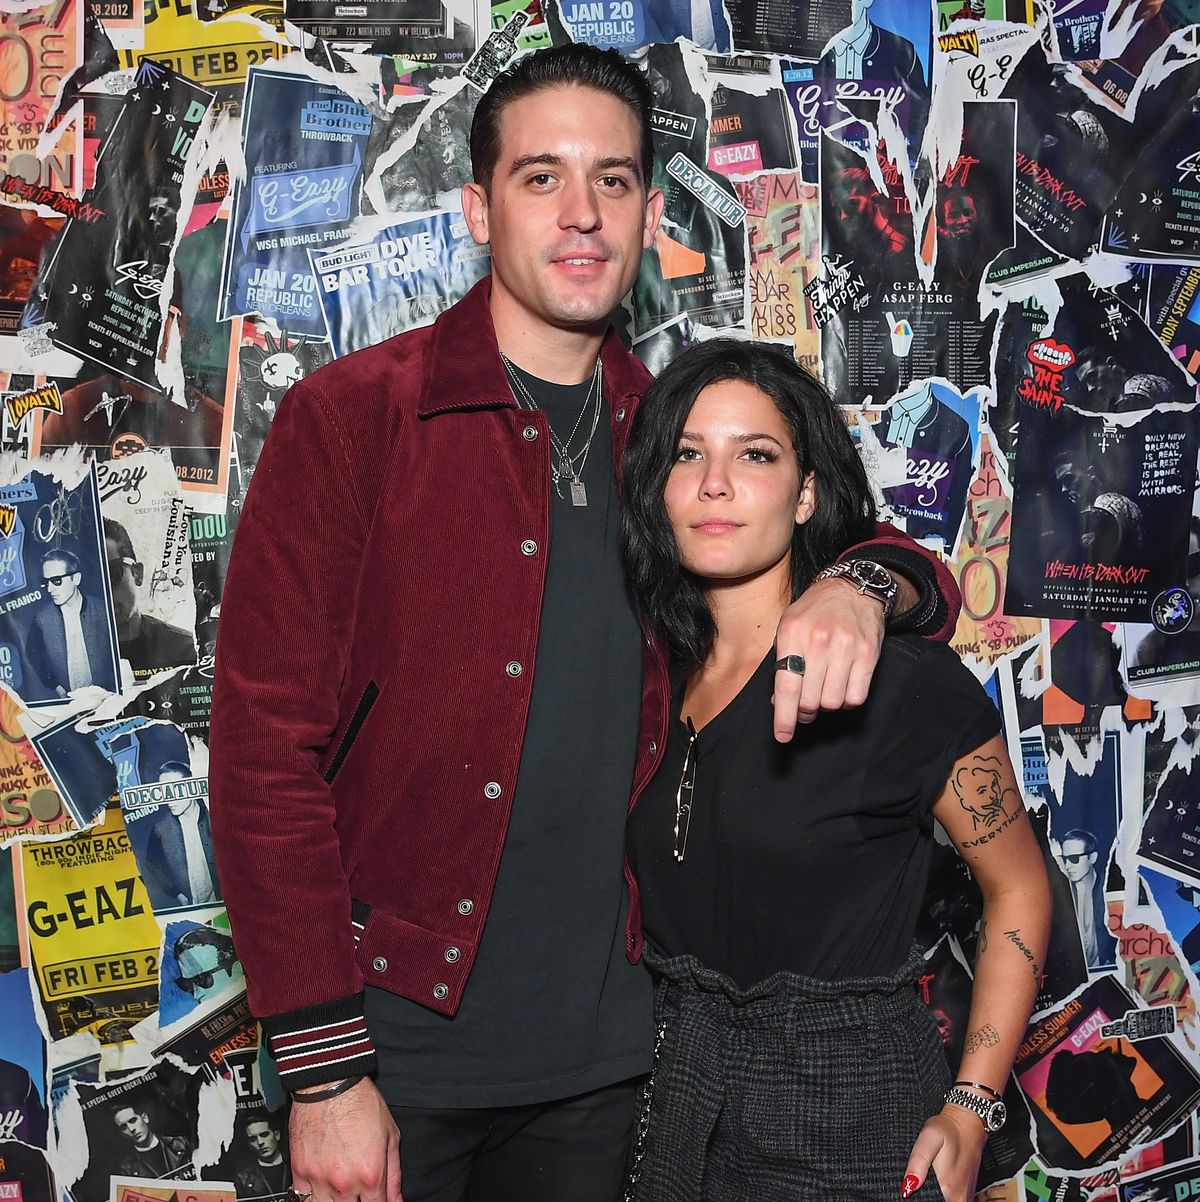 Bud Light Dive Bar Tour And Gerry's Pop Up Shop In New Orleans With G-Eazy And Friends